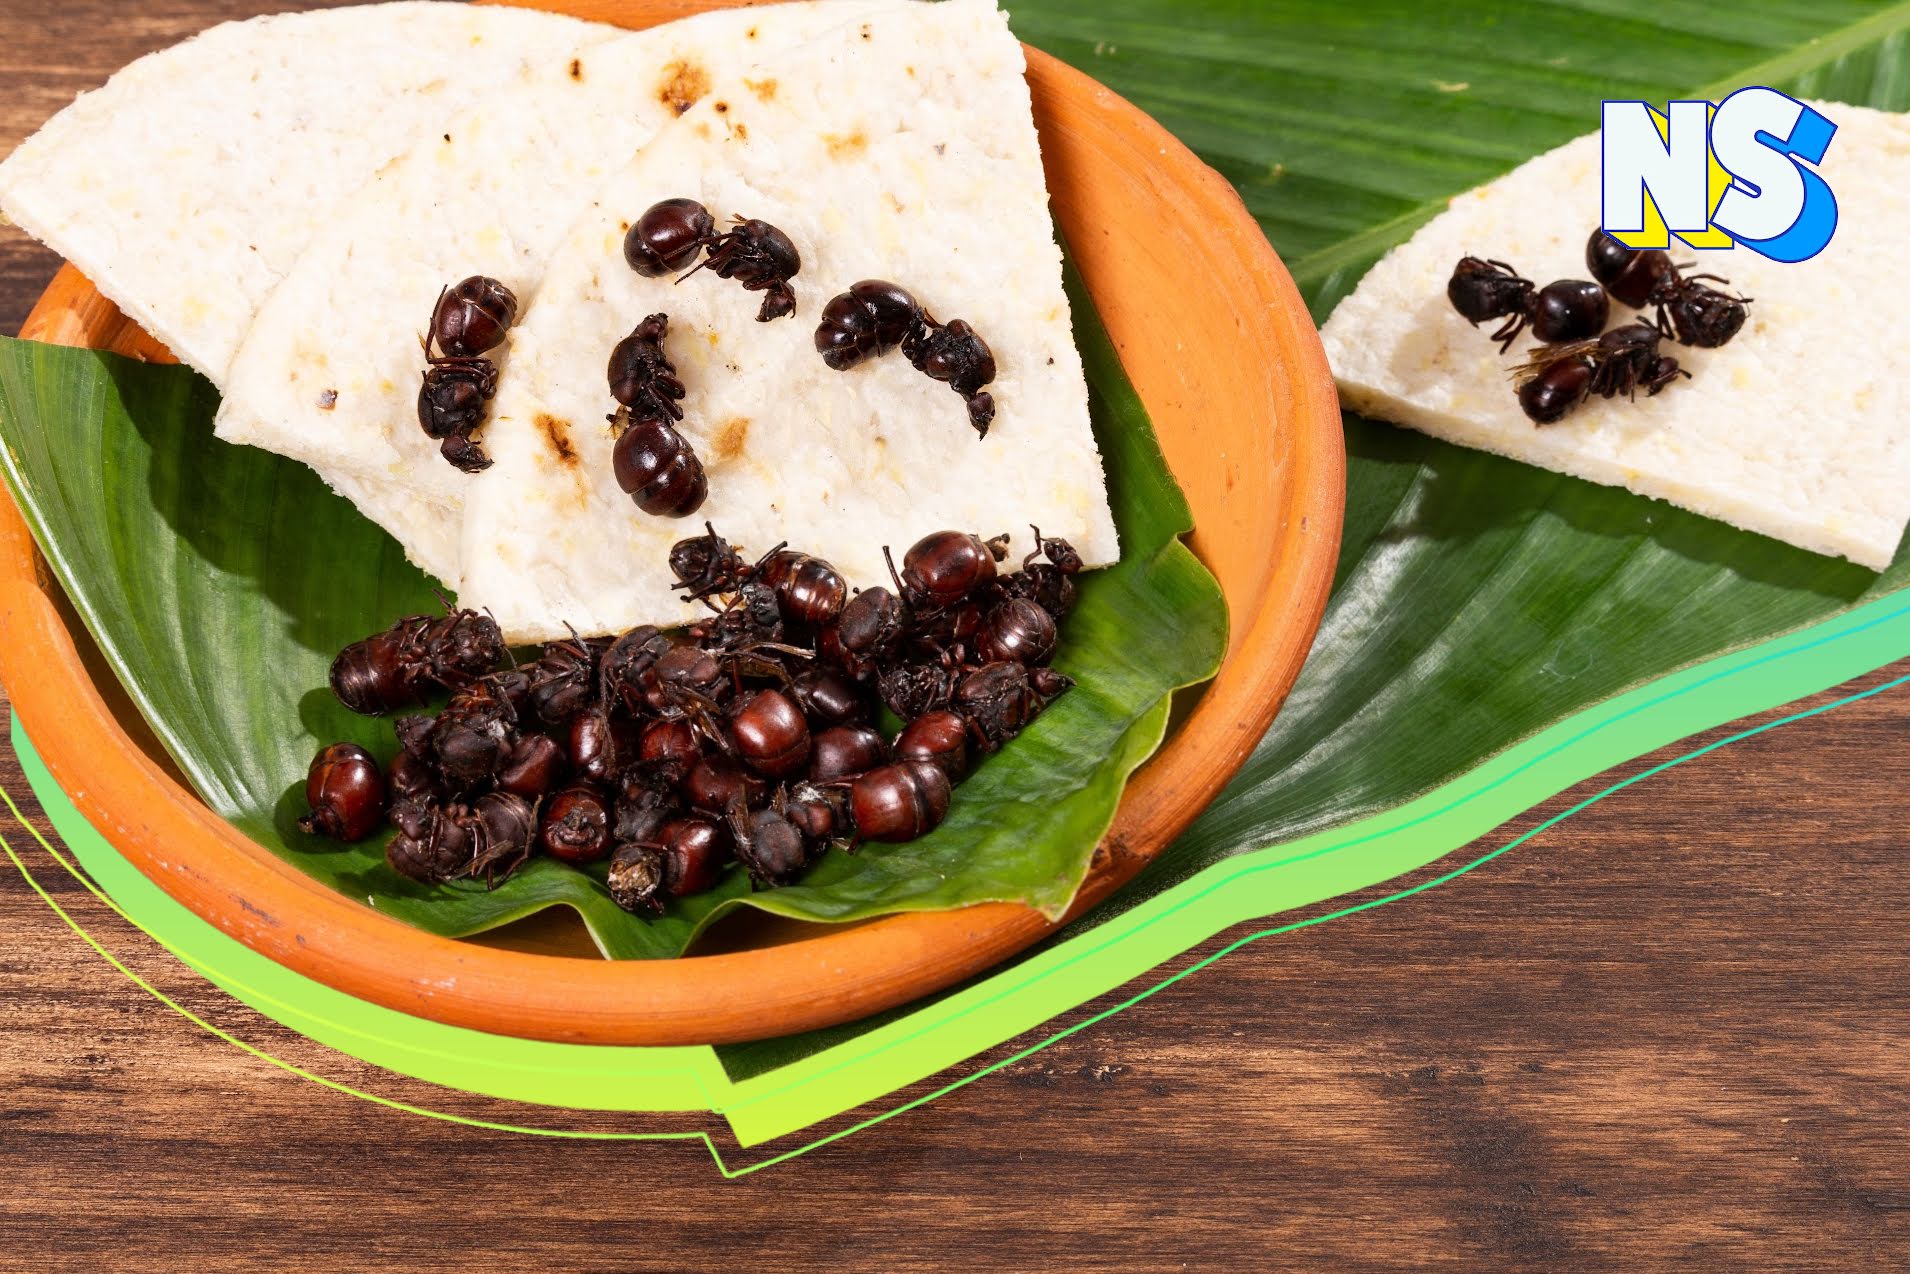 Ay, Que Rico: Ants Are a Culinary Delicacy for Some Latinos